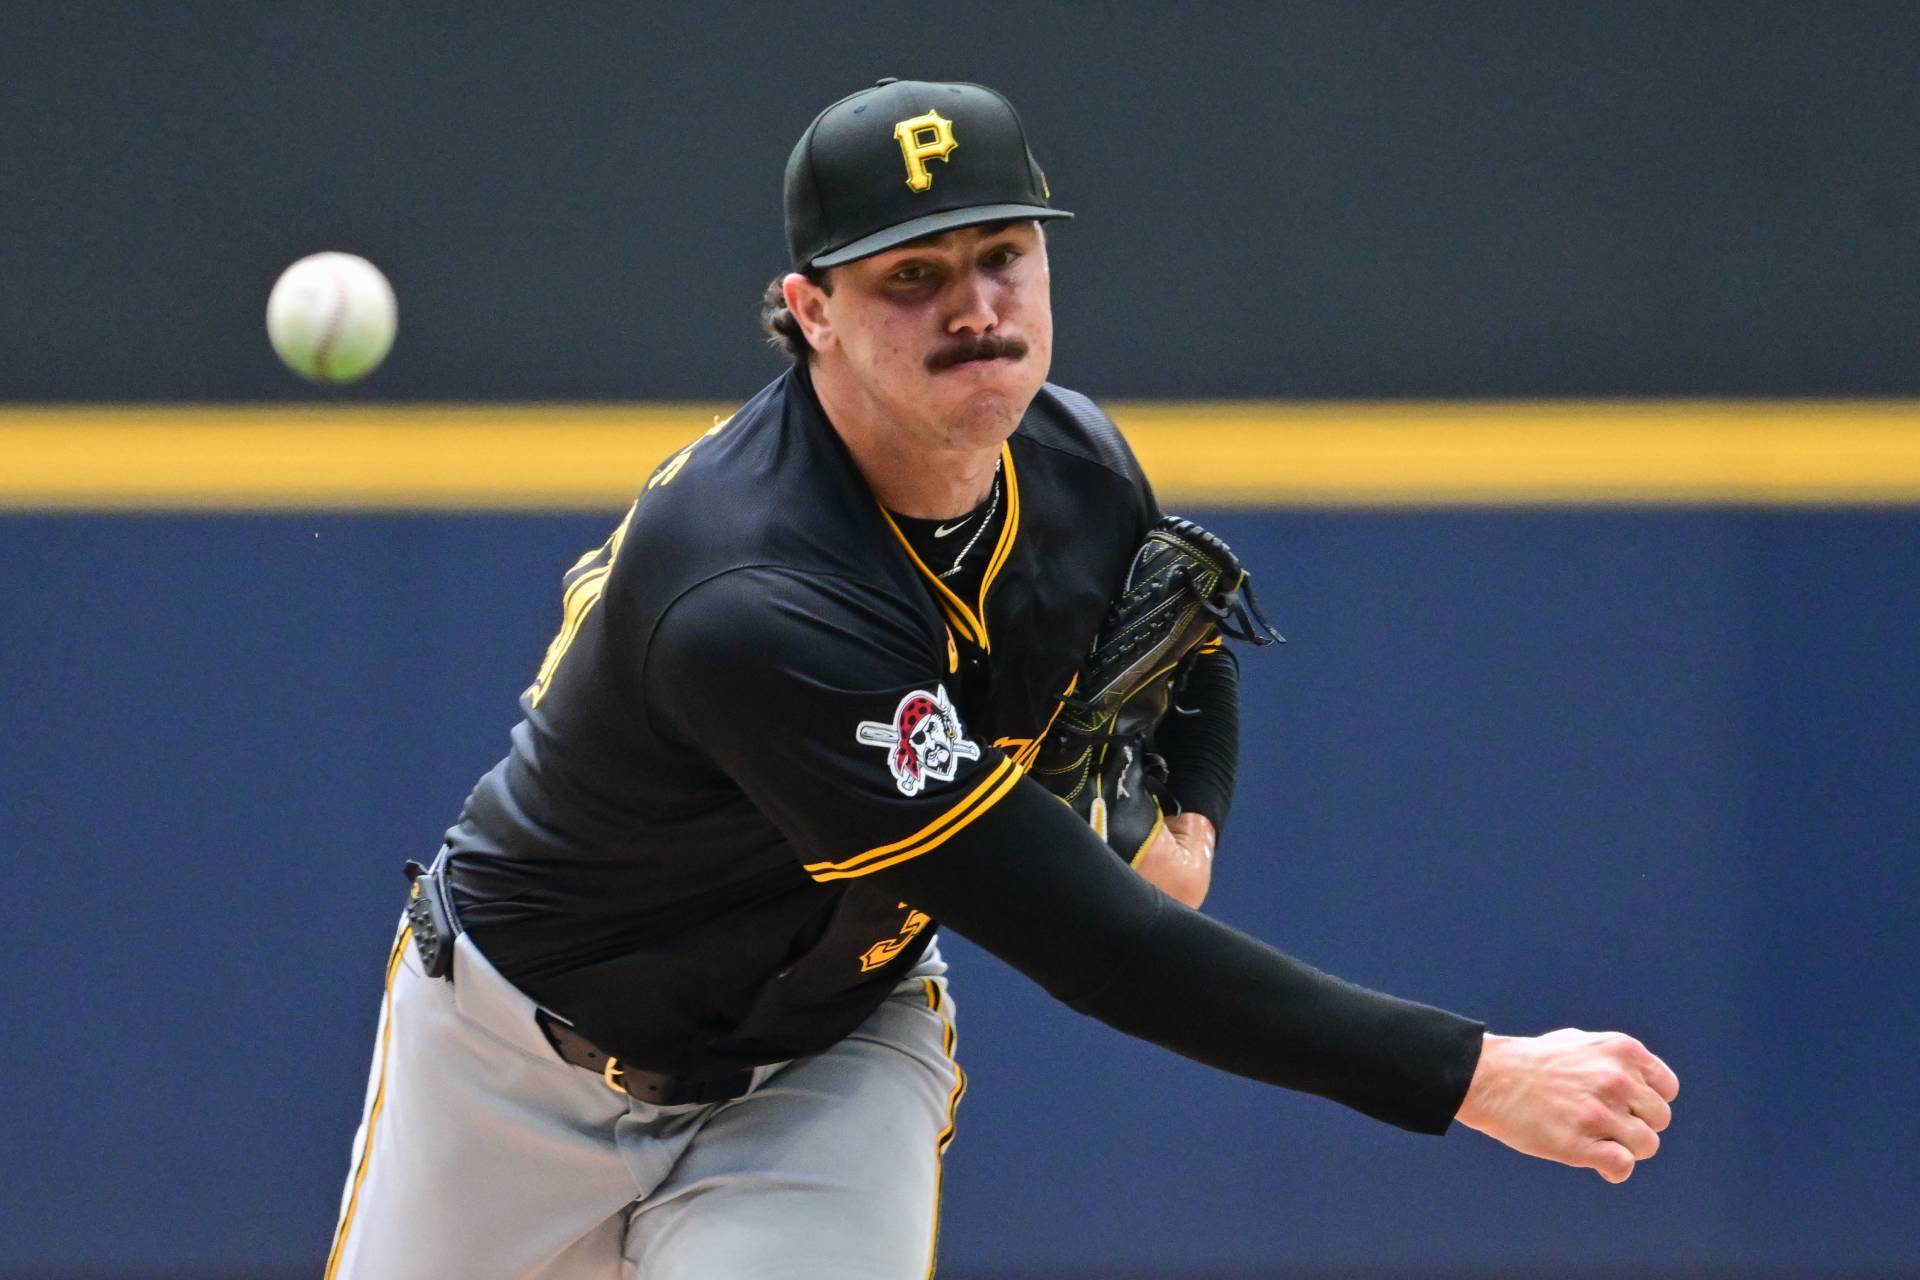 Paul Skenes Cy Young Odds & Other MLB Futures Bets You Should Jump On